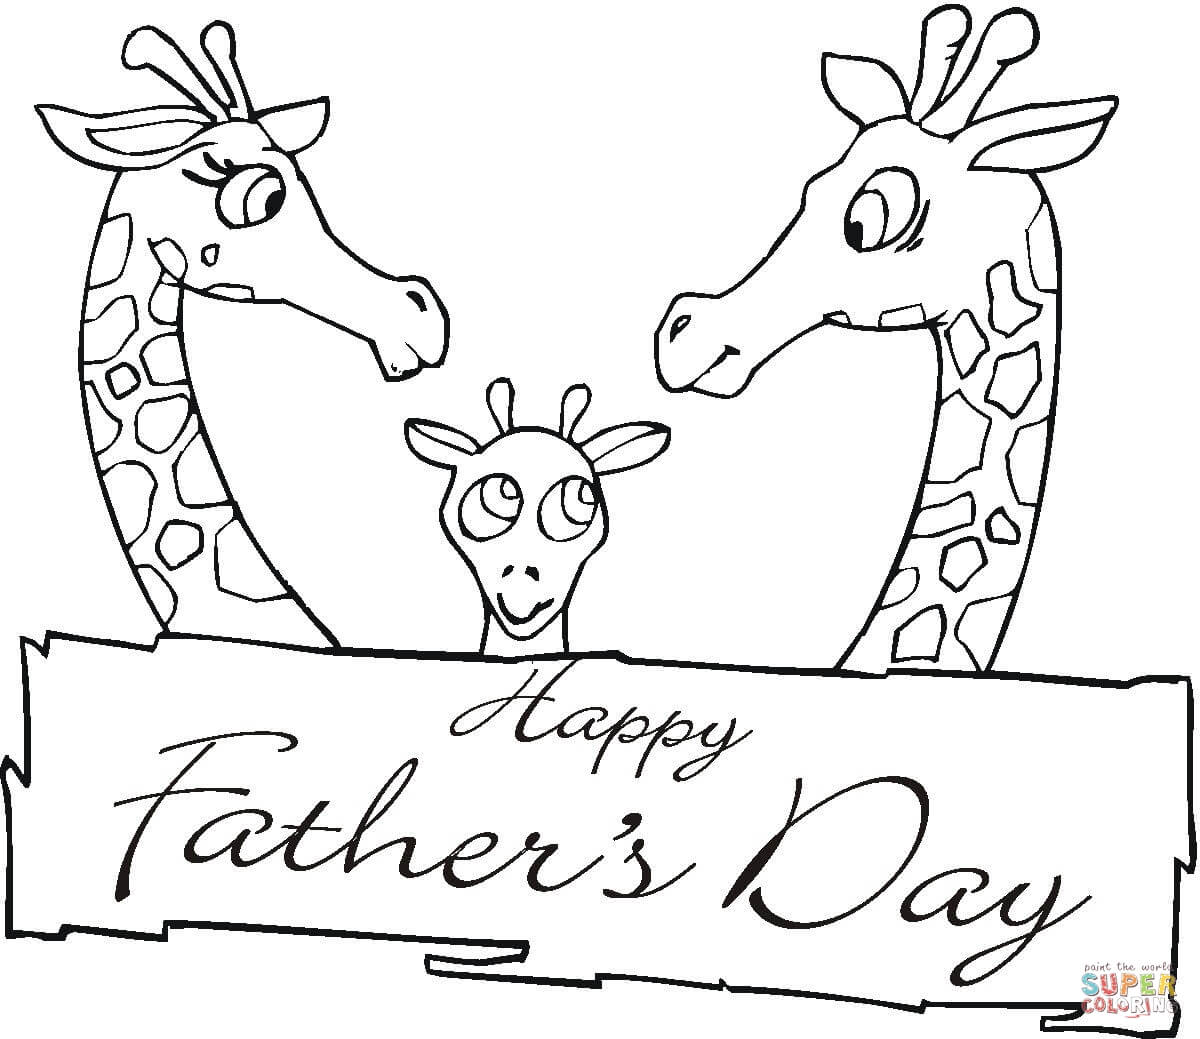 Giraffes Together On Father's Day coloring page | Free Printable Coloring  Pages